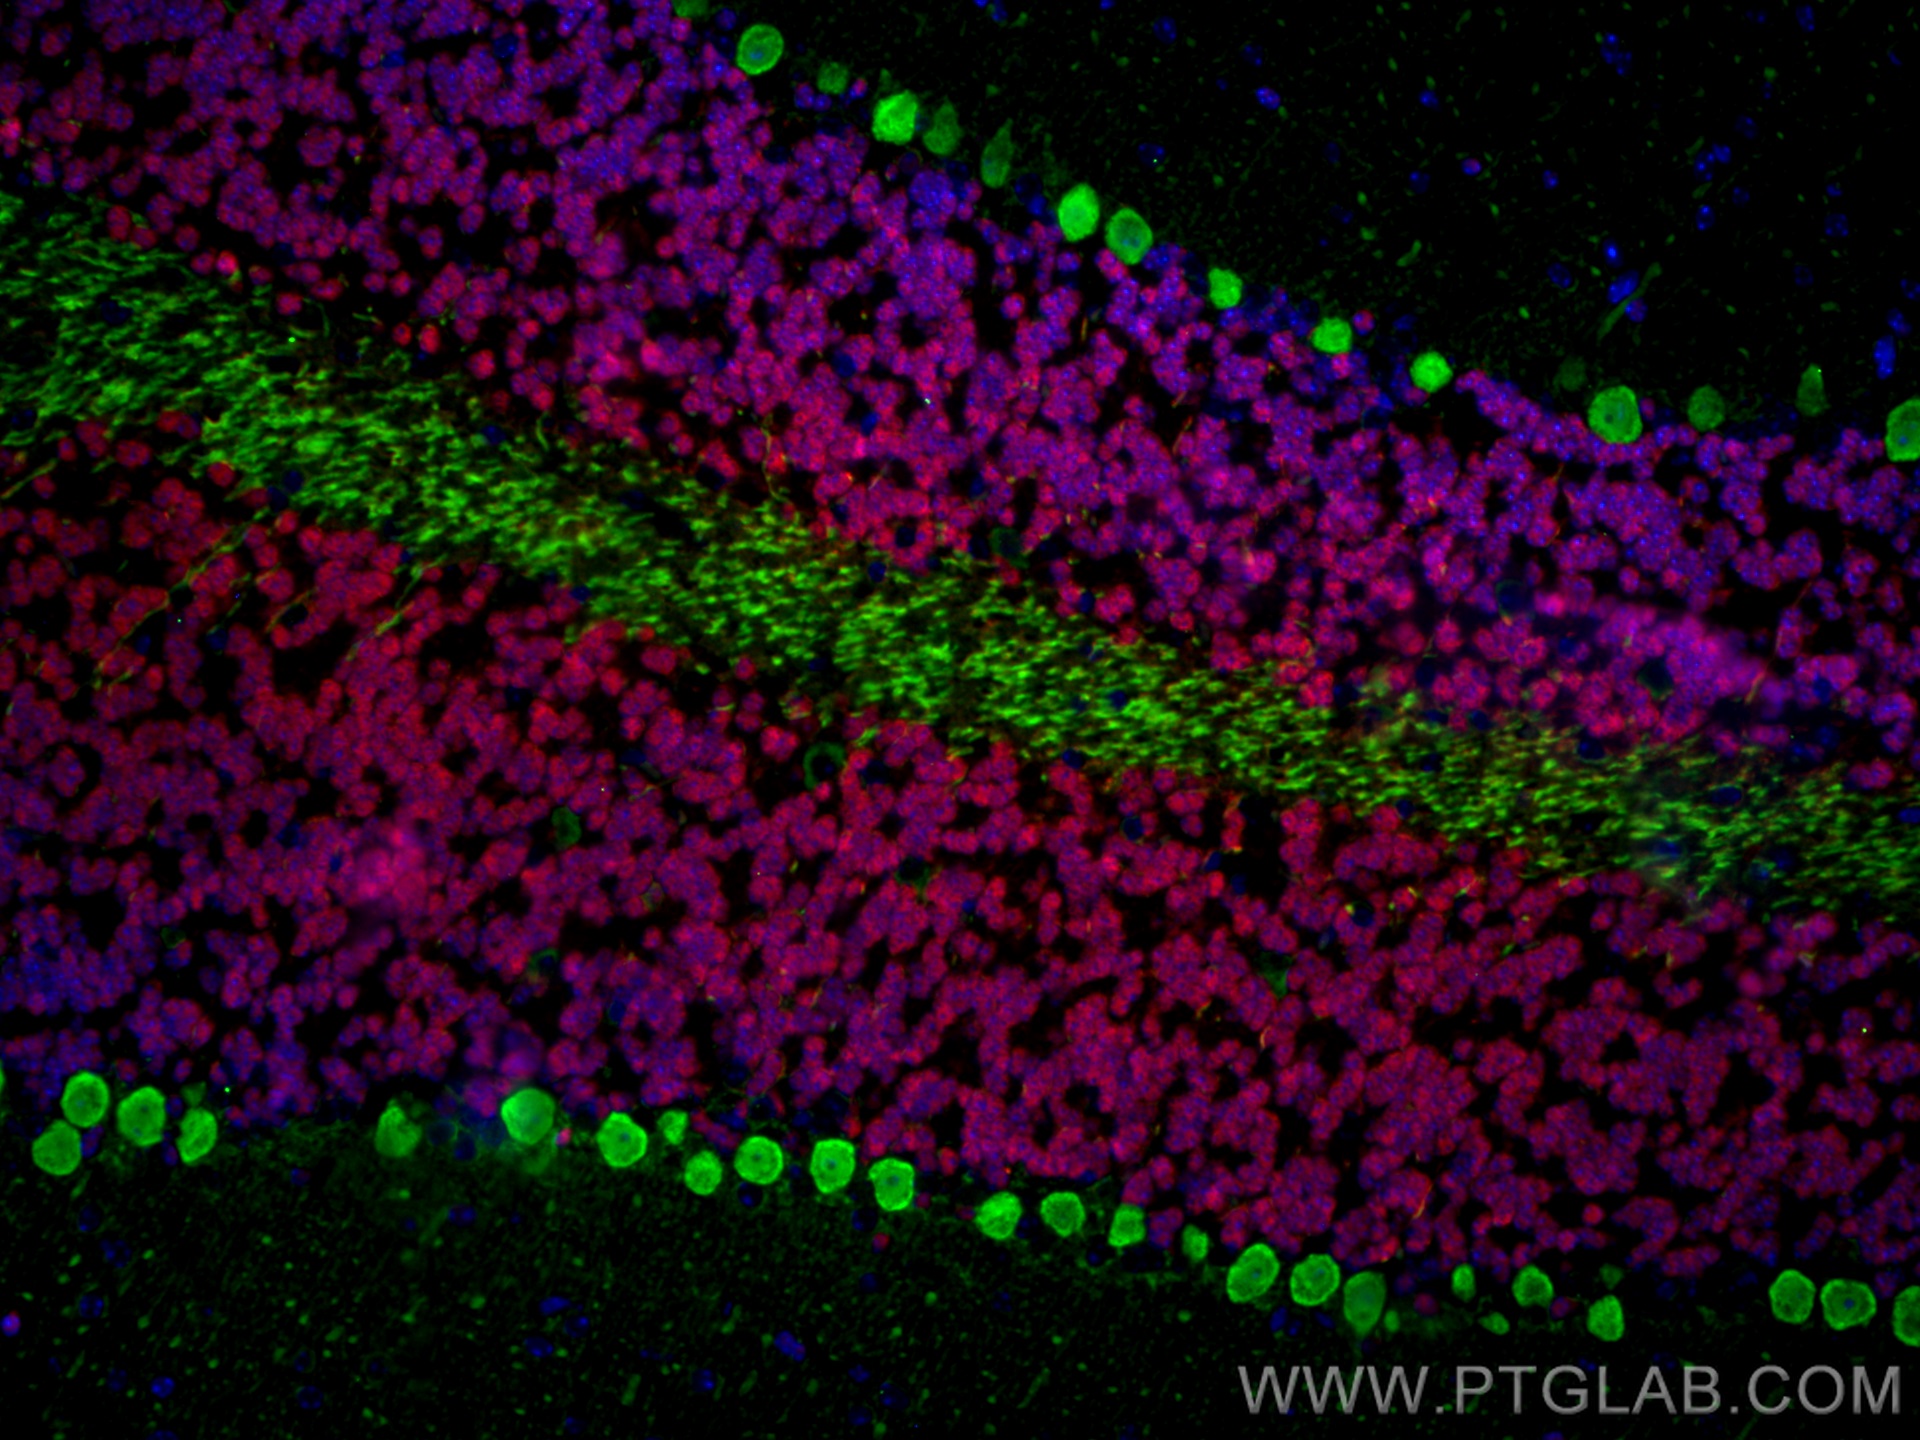 Immunofluorescence of mouse cerebellum: mouse cerebellum FFPE section was stained with Rabbit anti-NeuN polyclonal antibody (26975-1-AP, 1:200, red) and mouse anti-Calbindin-D28k monoclonal antibody (66394-1-Ig, 1:200, green). Multi-rAb CoraLite® Plus 594 conjugated Recombinant Goat anti-rabbit secondary antibody (RGAR004, 1:500) and Multi-rAb CoraLite® Plus 488 conjugated Goat Anti-Mouse Recombinant Secondary Antibody (H+L) were used for detection (RGAM002, 1:500) . 